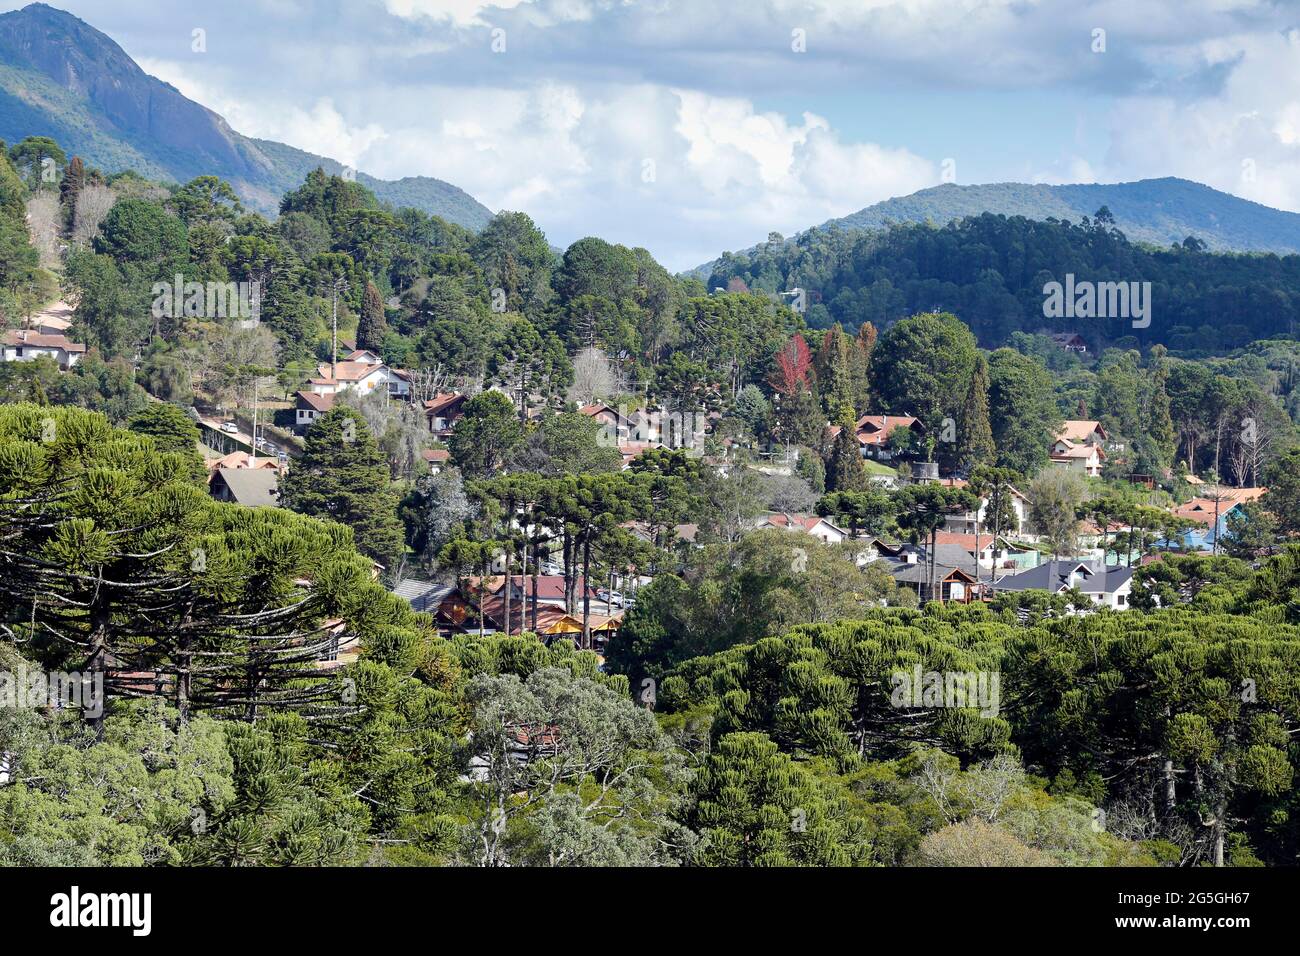 view of nature and buildings among the mountains from  Monte Verde, district of Camanducaia, interior of Minas Gerais. Stock Photo